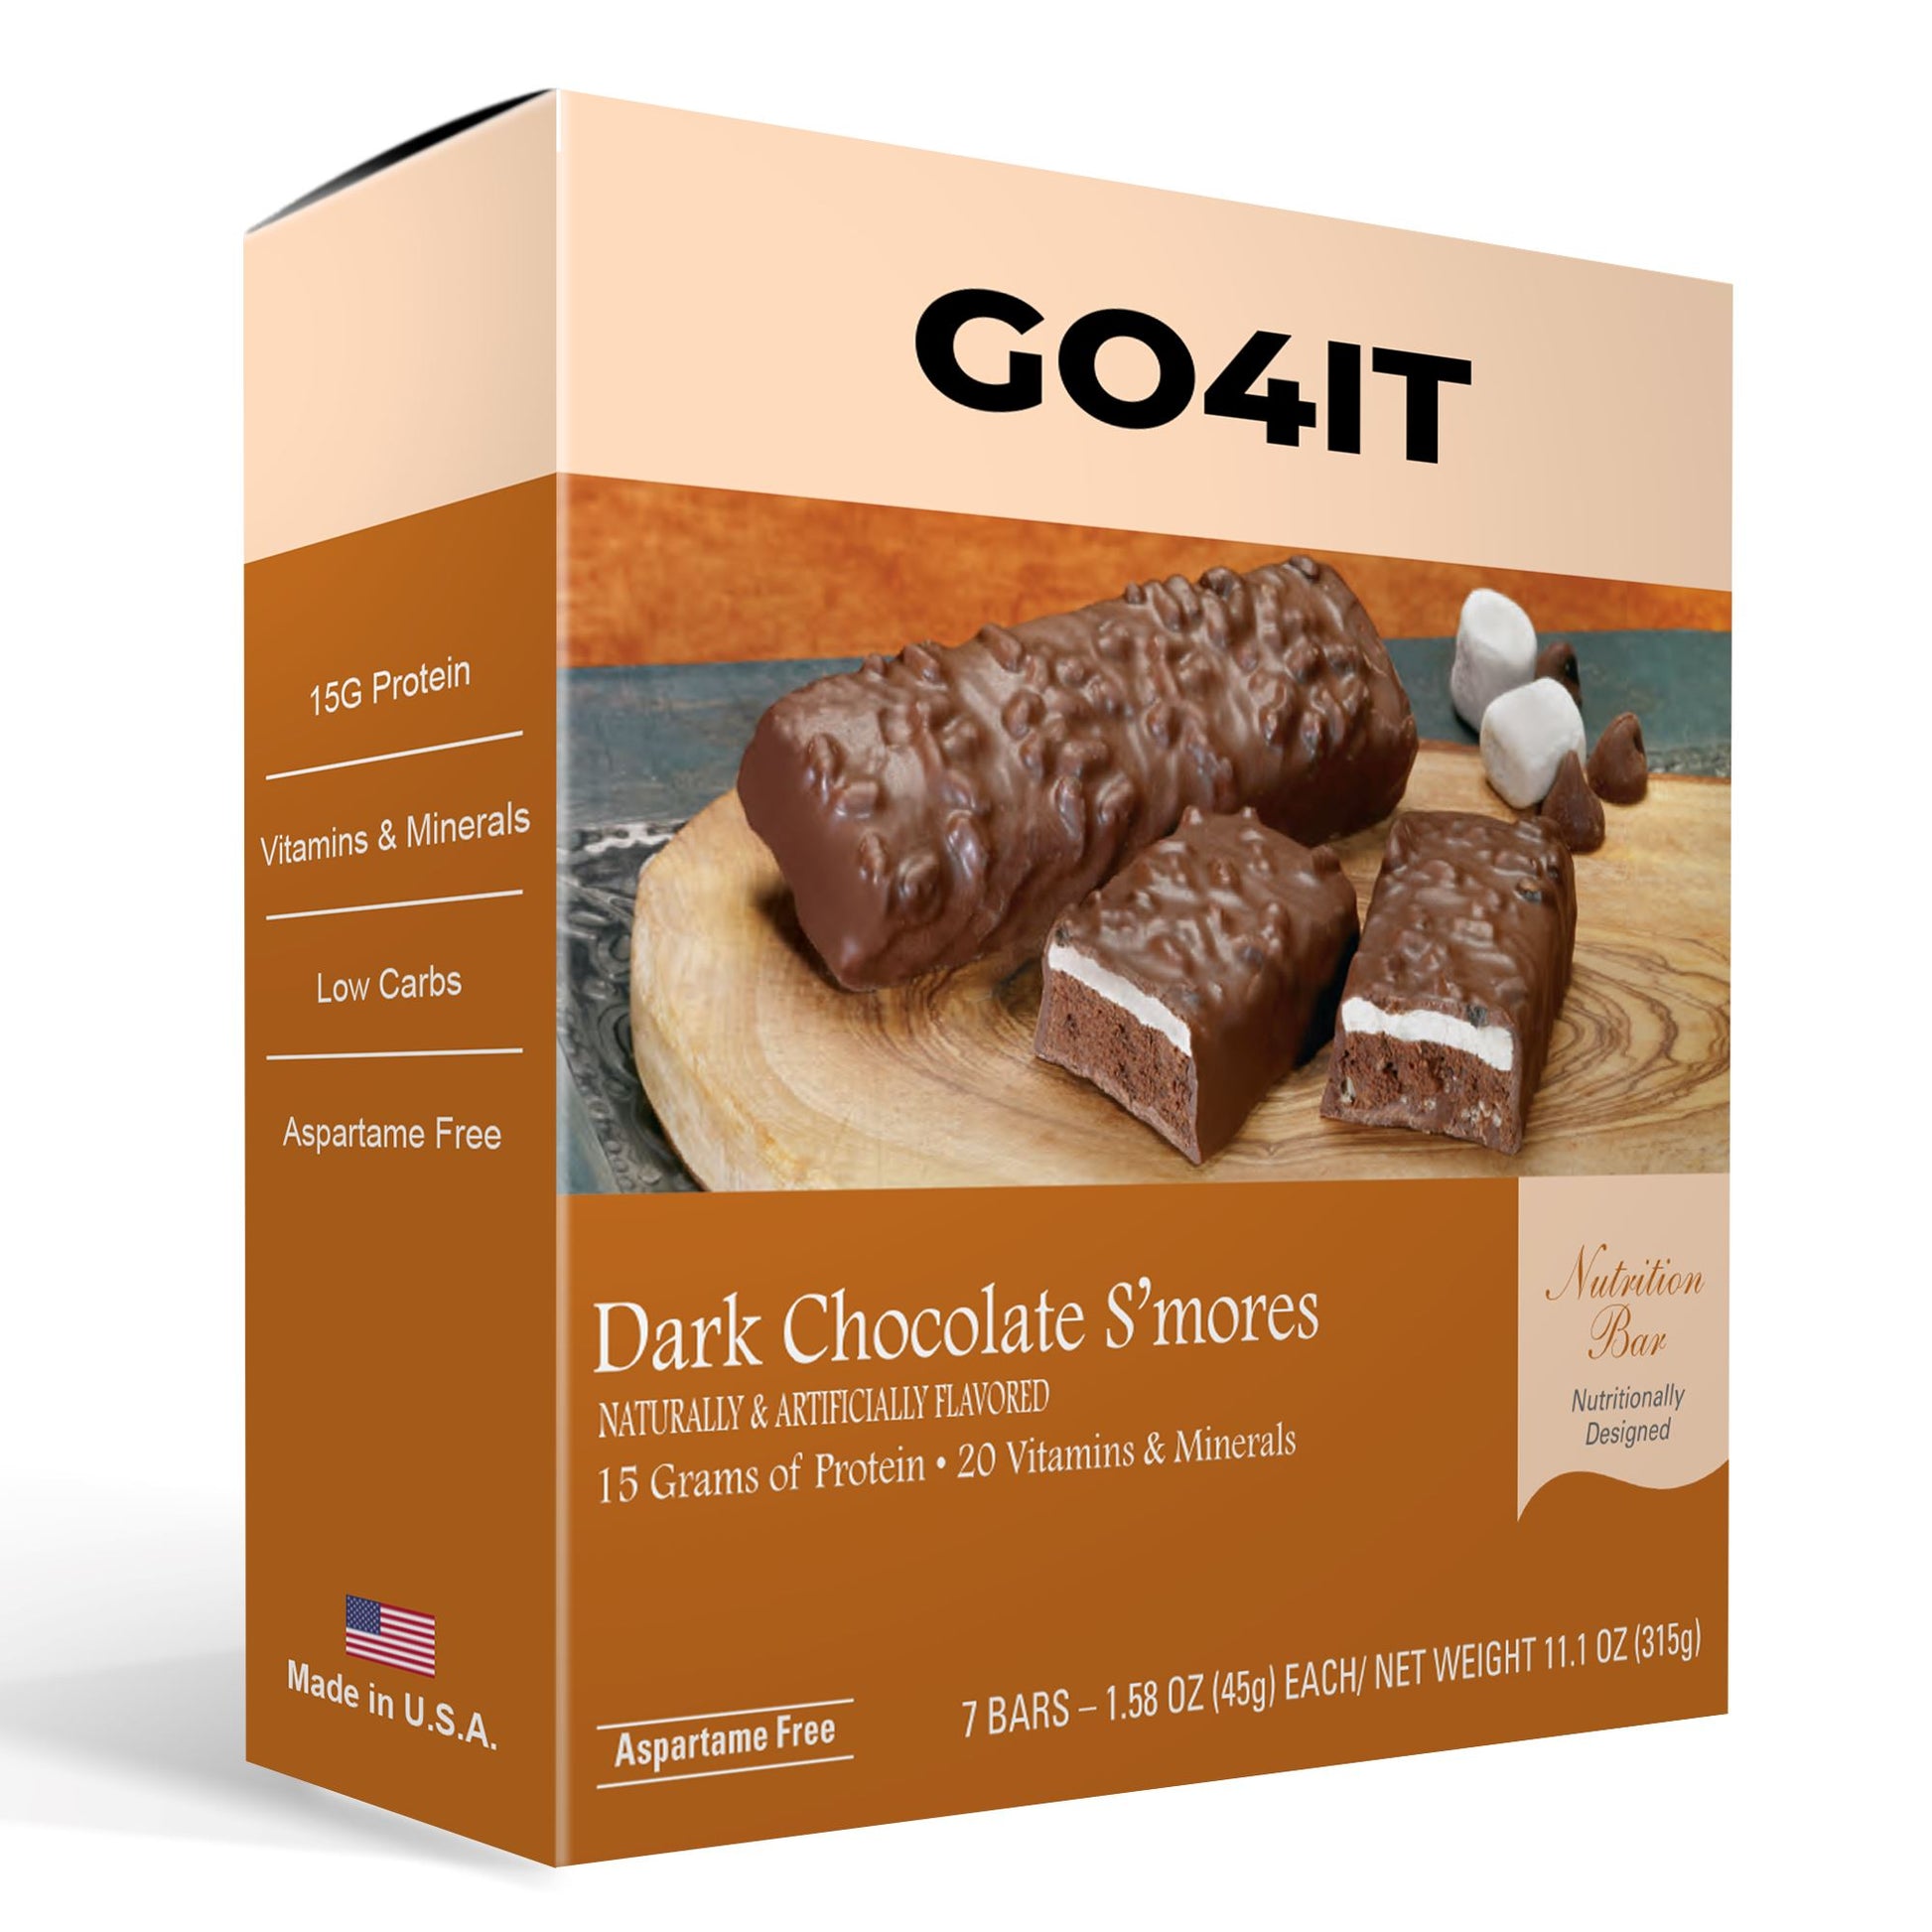 Chocolate Smores Meal Replacement Bar by GO4IT Health. Healthy Kosher Protein bar with low calories and low carbs